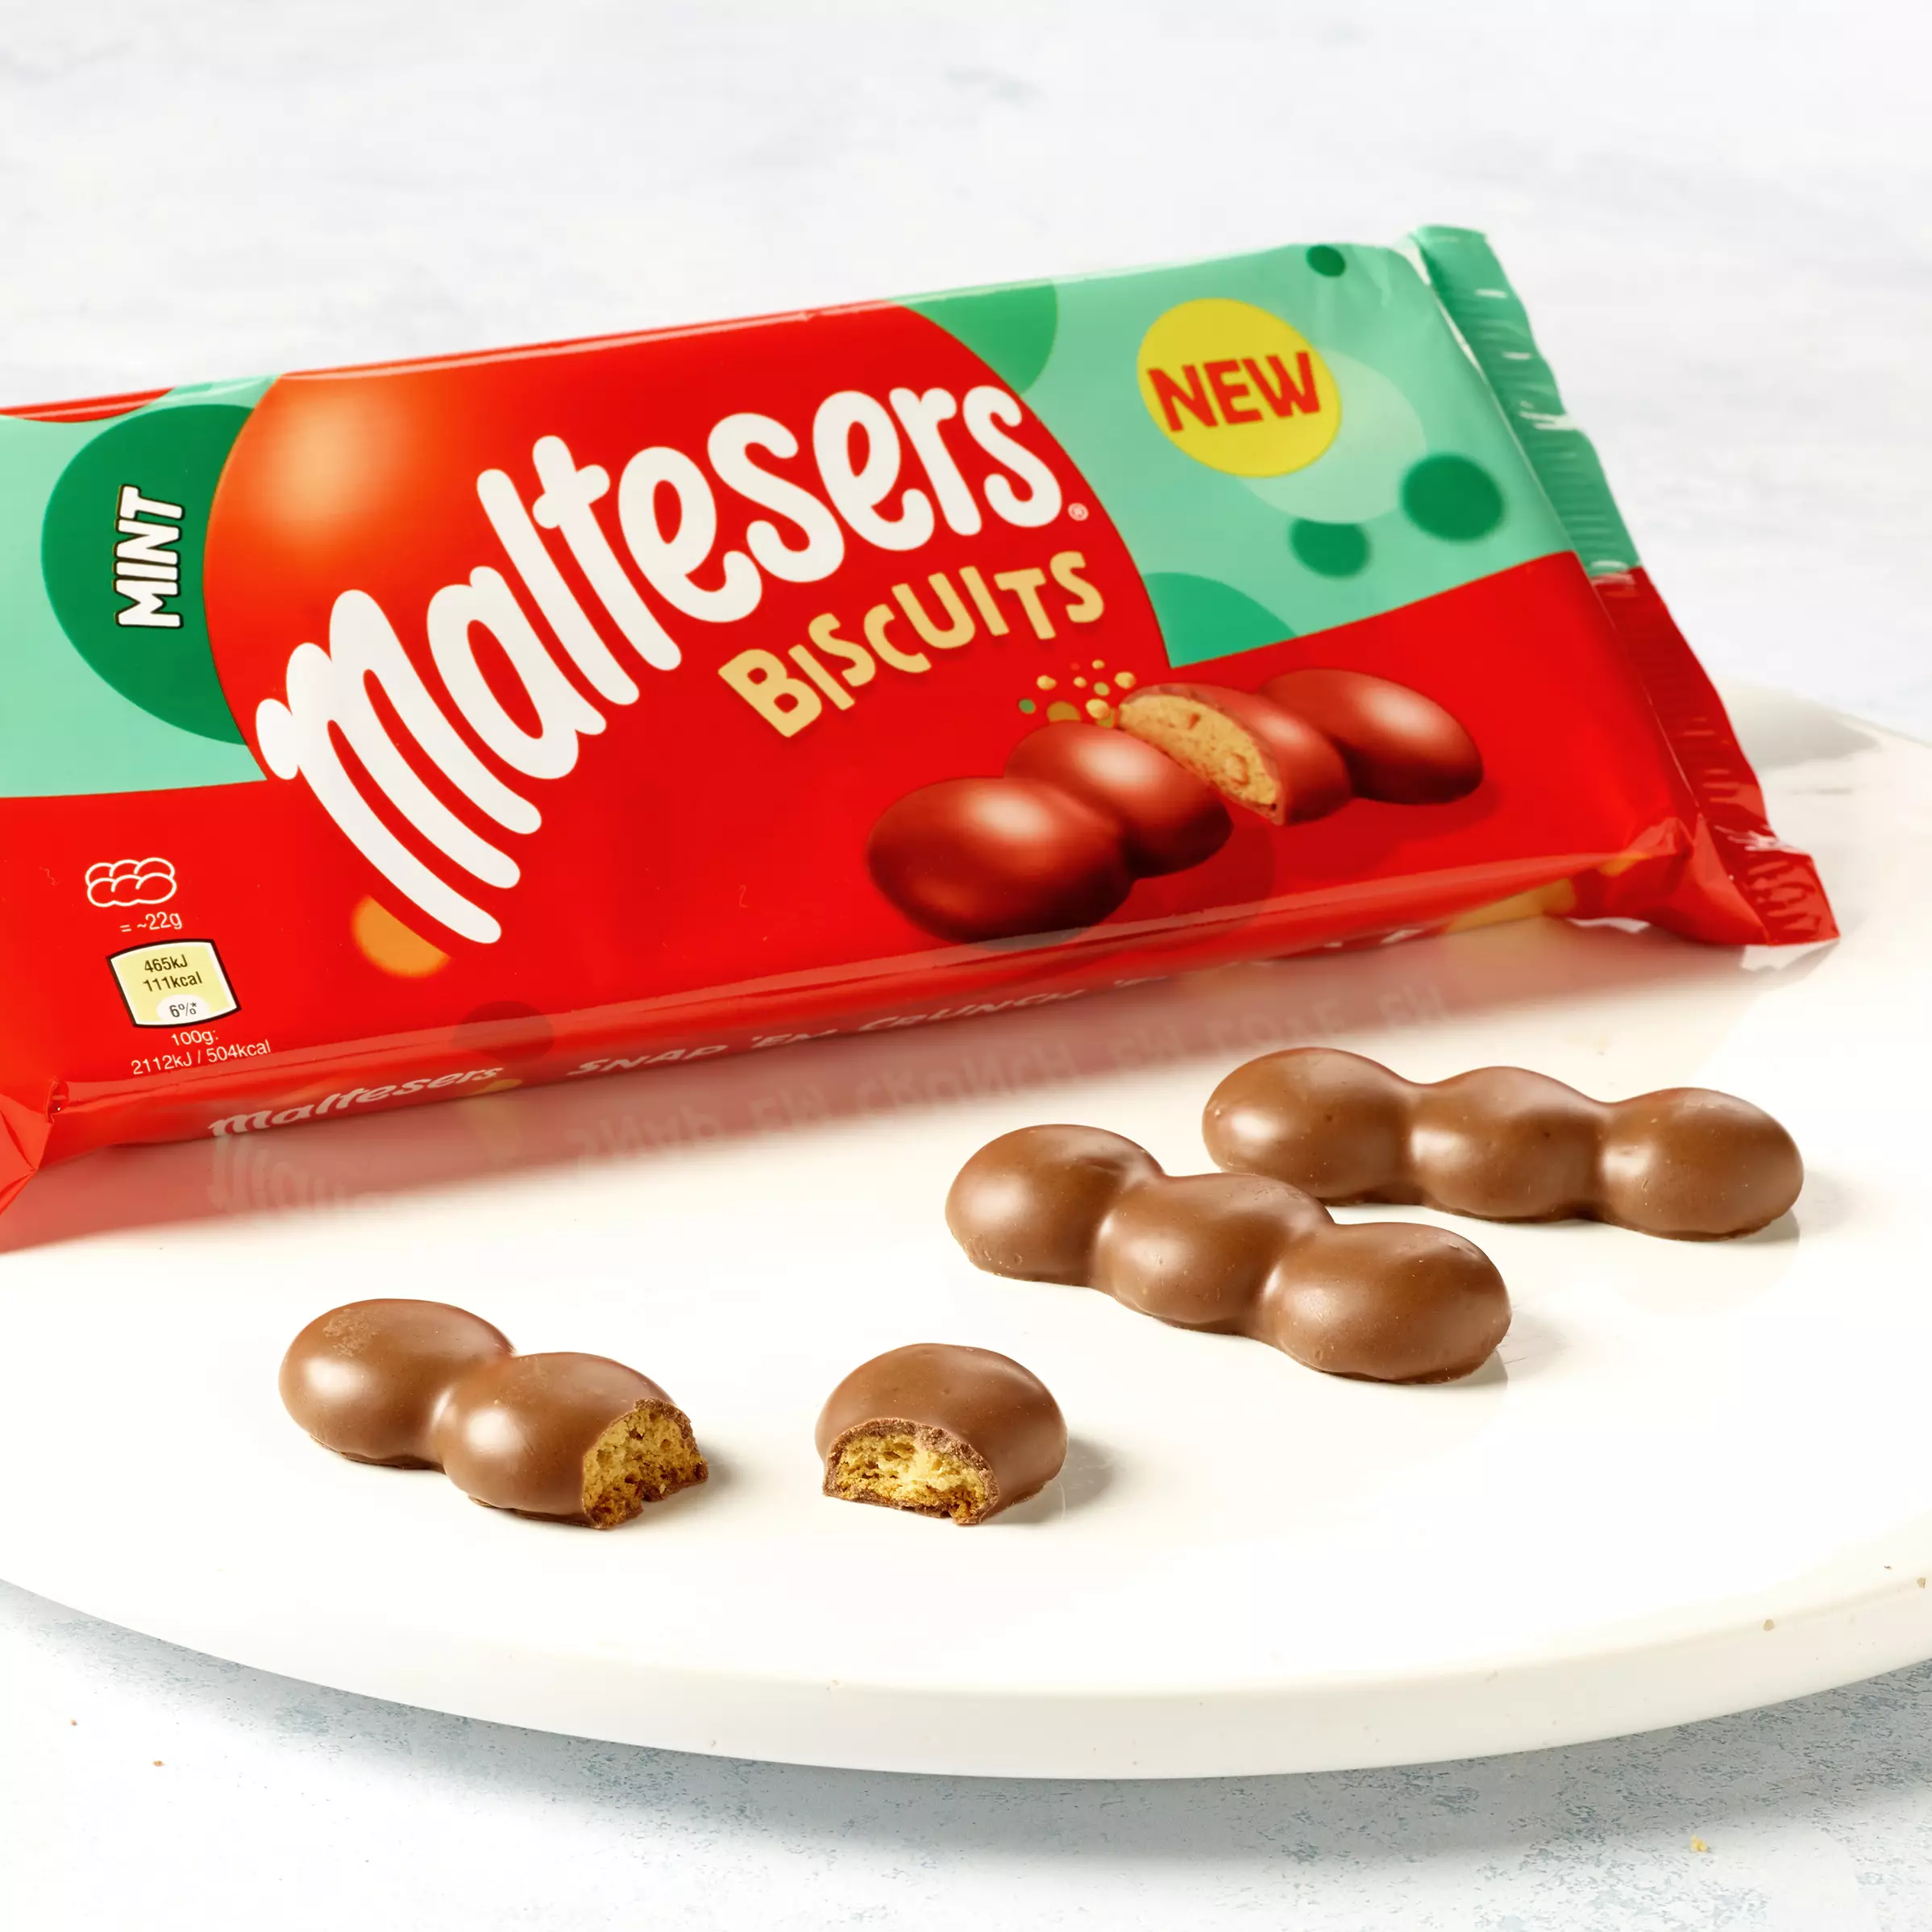 The new Maltesers Mint Biscuits (